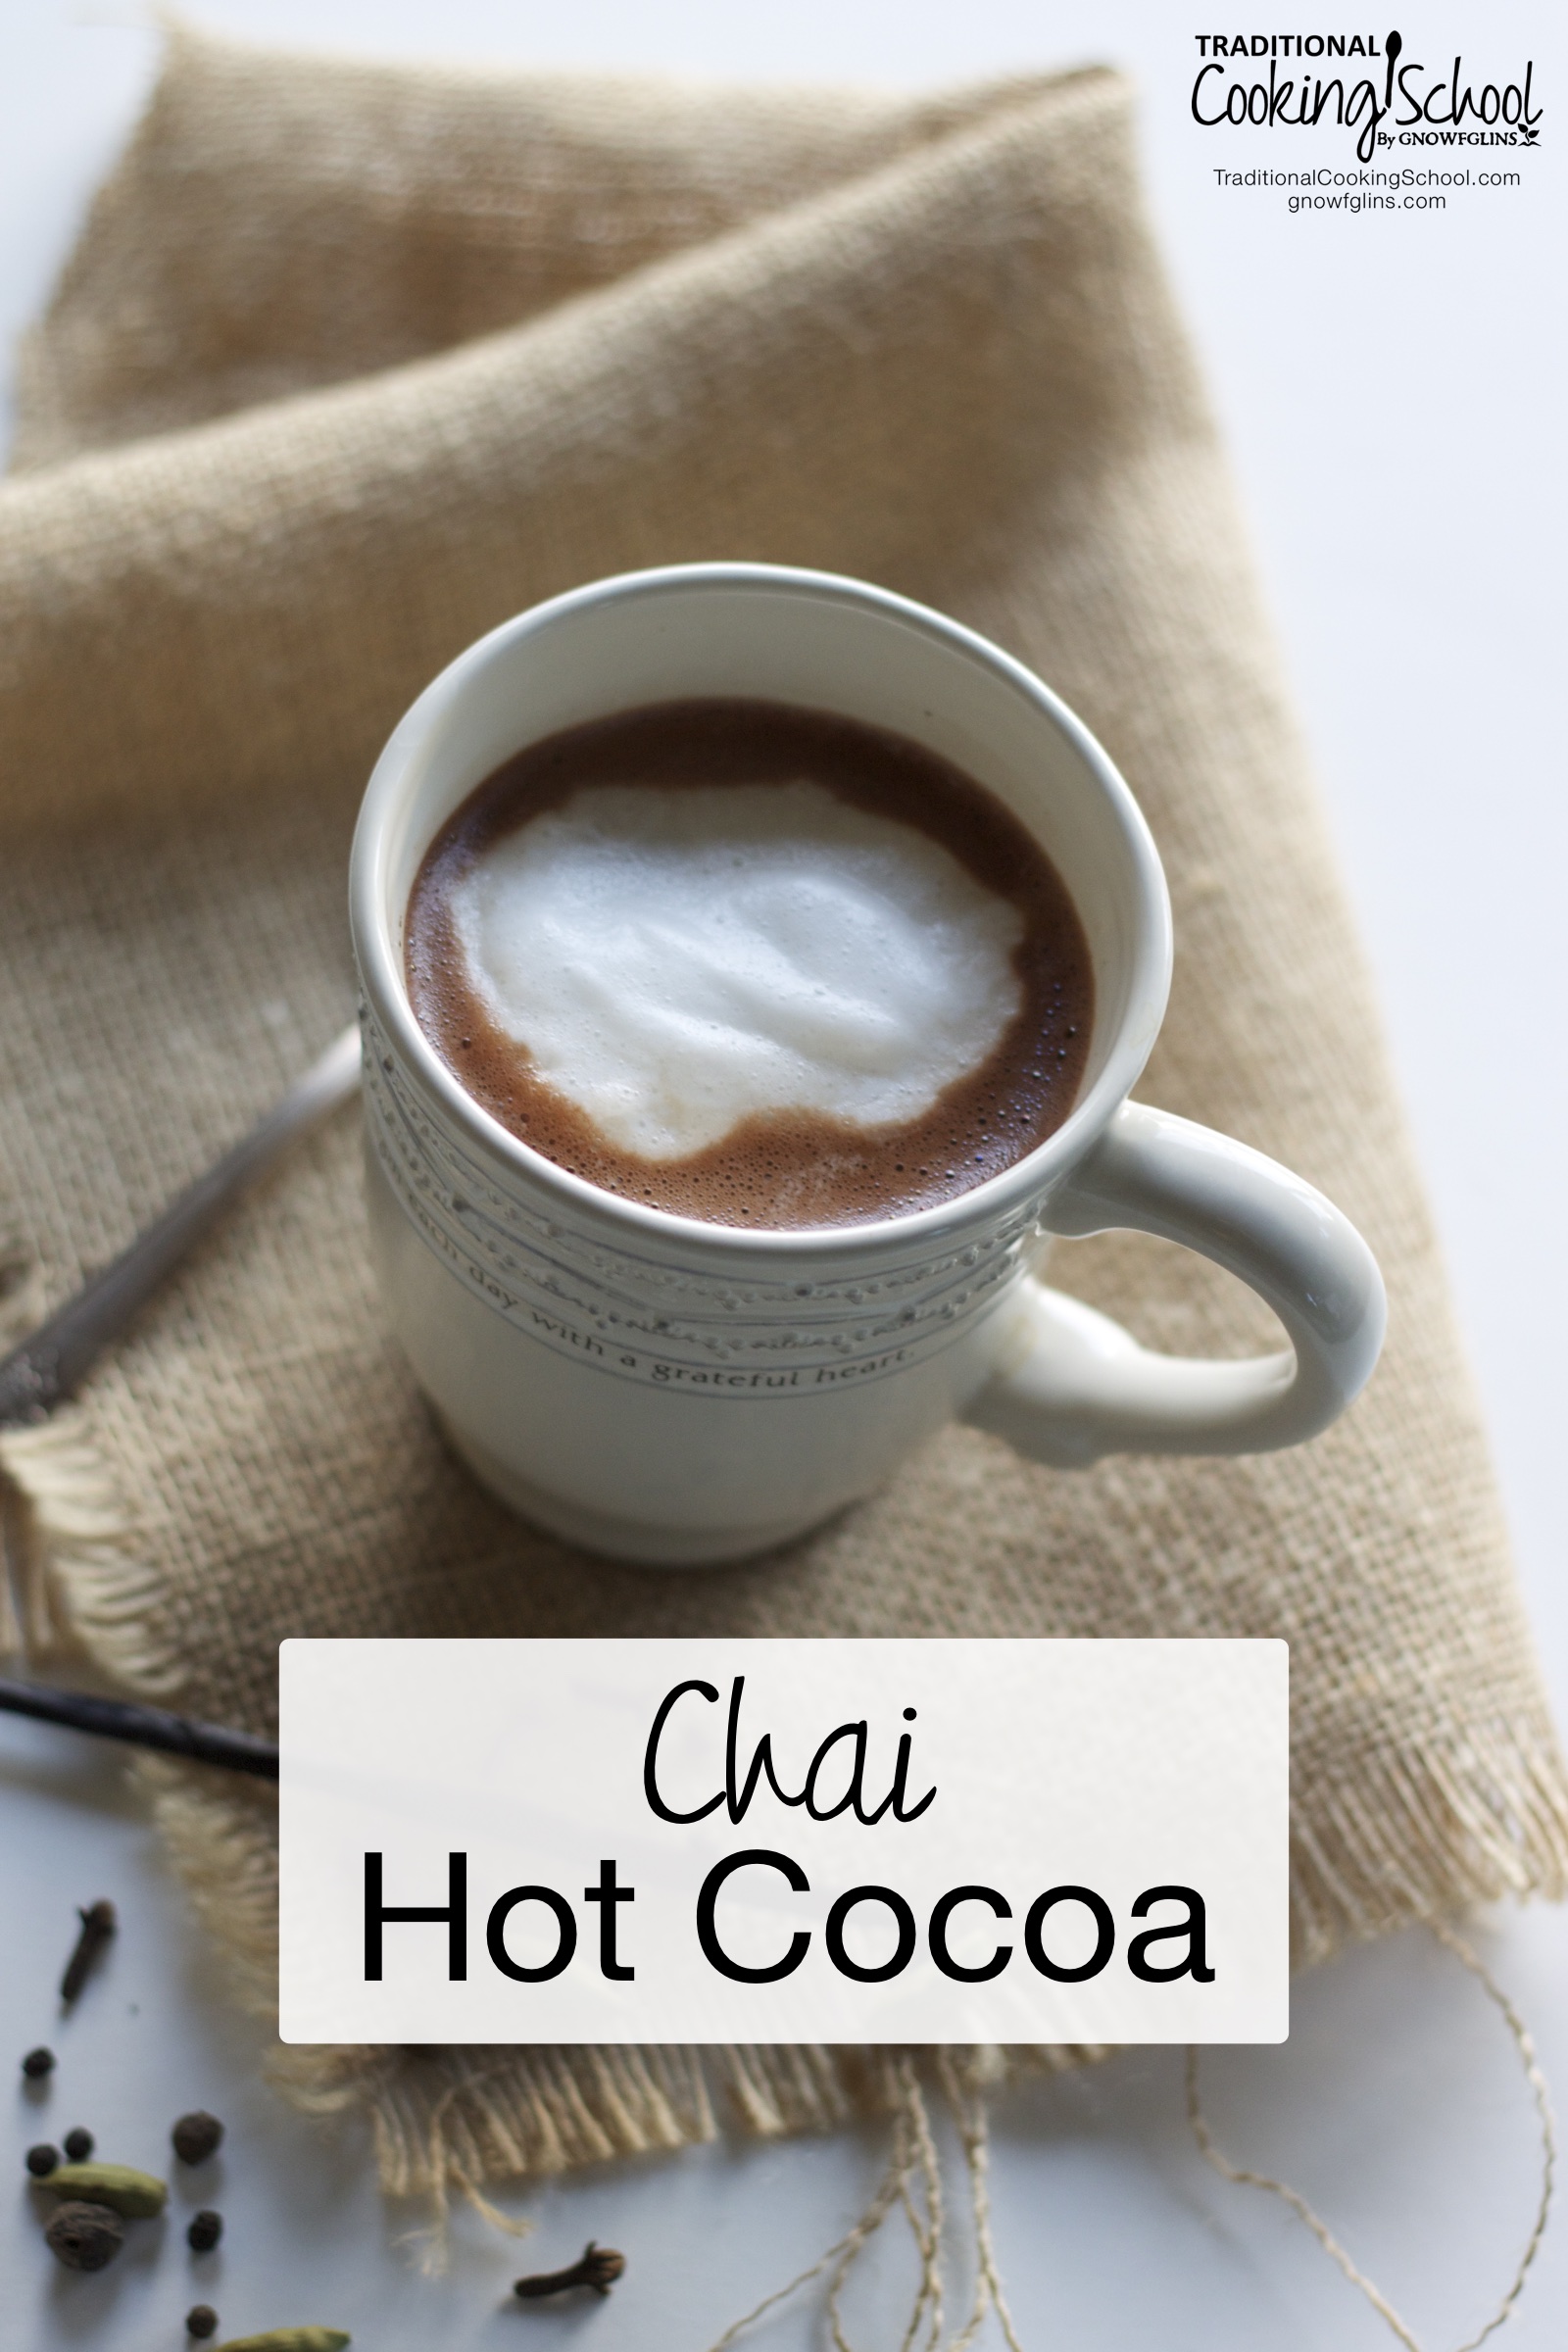 Chai Hot Cocoa | Love hot cocoa and chai? Now you can have the best of both worlds -- when the two are married in a cup! | TraditionalCookingSchool.com